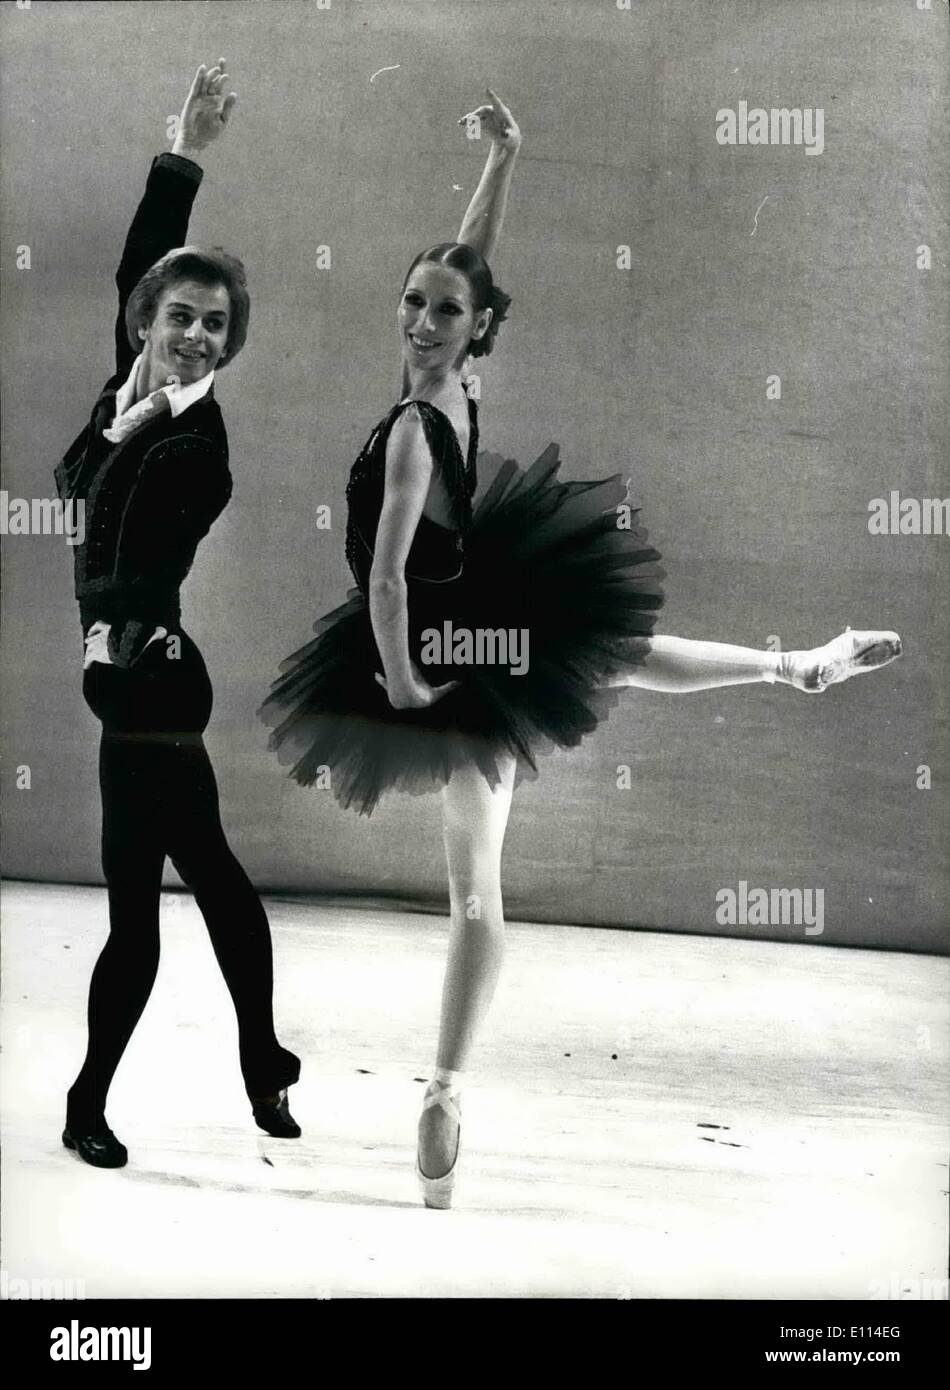 Nov. 11, 1975 - Russian Dancers To Dance Together For The First Time In This Country For BBC Television: Russian dancers Mikhail Baryshnikov and Natalia Makarova dance together for the first rime in this country for BBC's television's ''Gala Performance ''. the recording takes place at Sadler's Wells Theatre tomorrow, and the performance will be shown on BBC-1 at the end of the year. Both dancers are former member of the Kirov Ballet,m and are currently dancing with the Royal Ballet - out act together Stock Photo